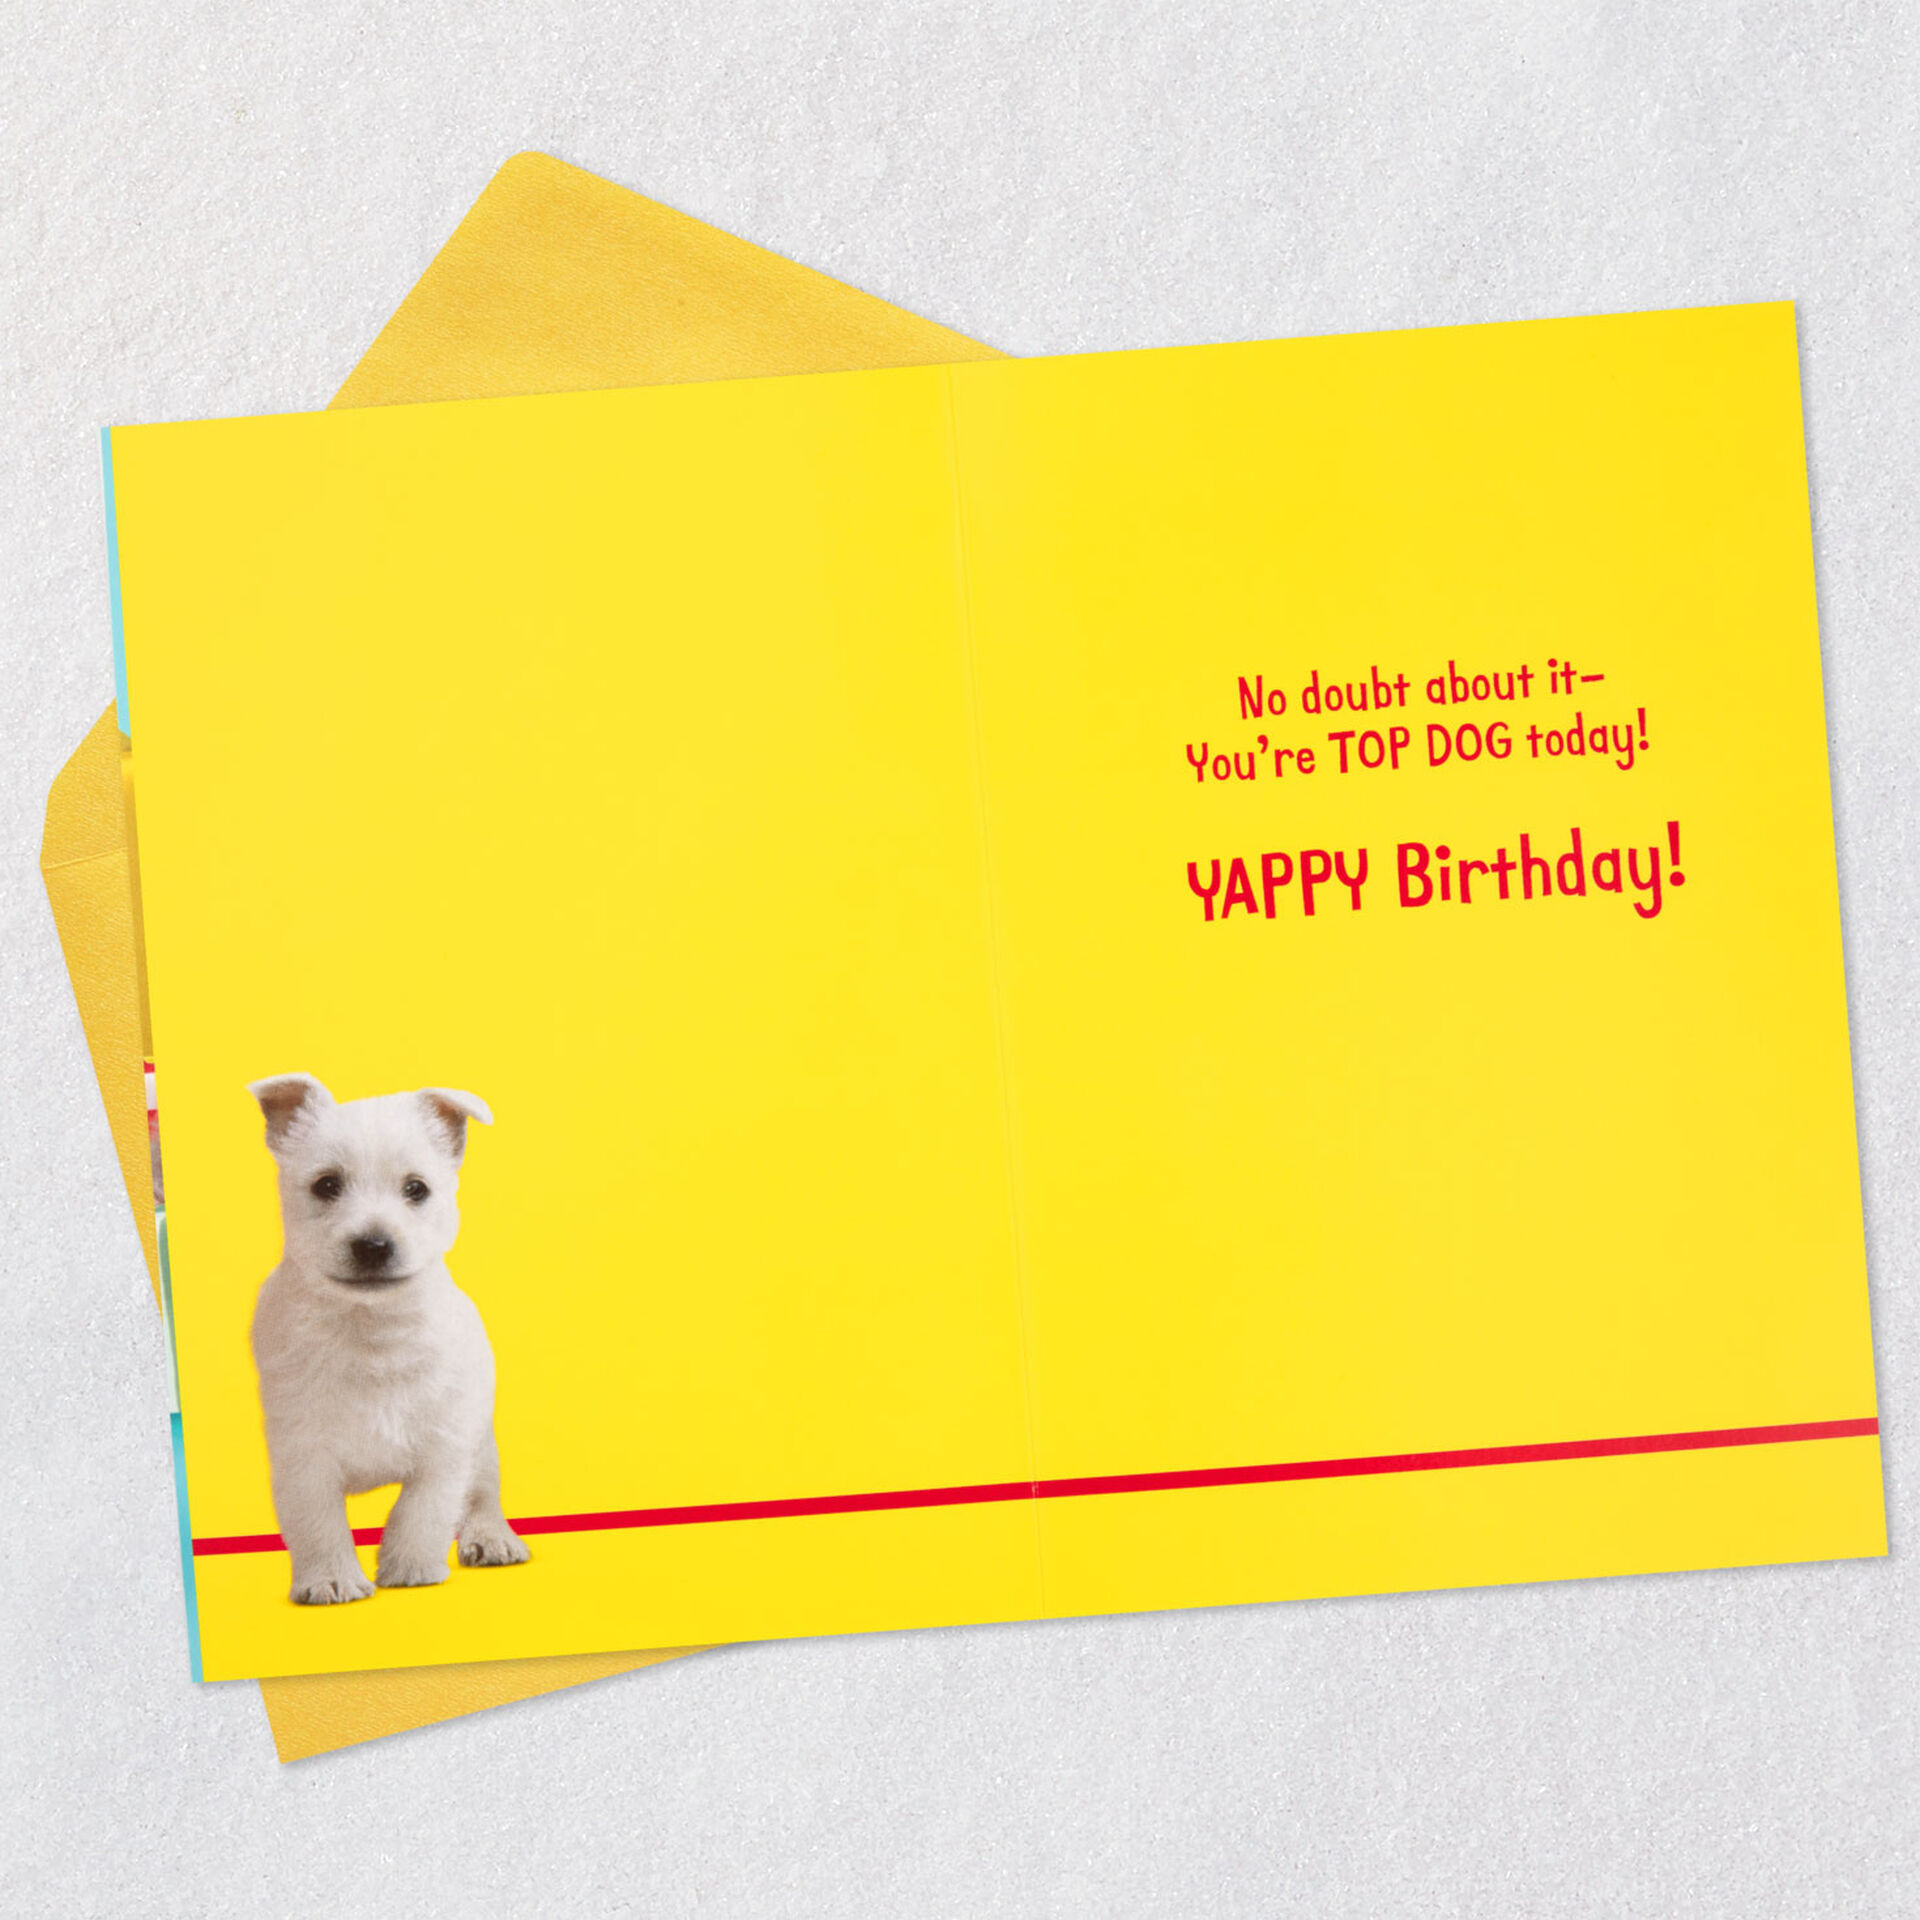 Puppy-Dogs-and-Gifts-Funny-Birthday-Card_200SUV1375_03